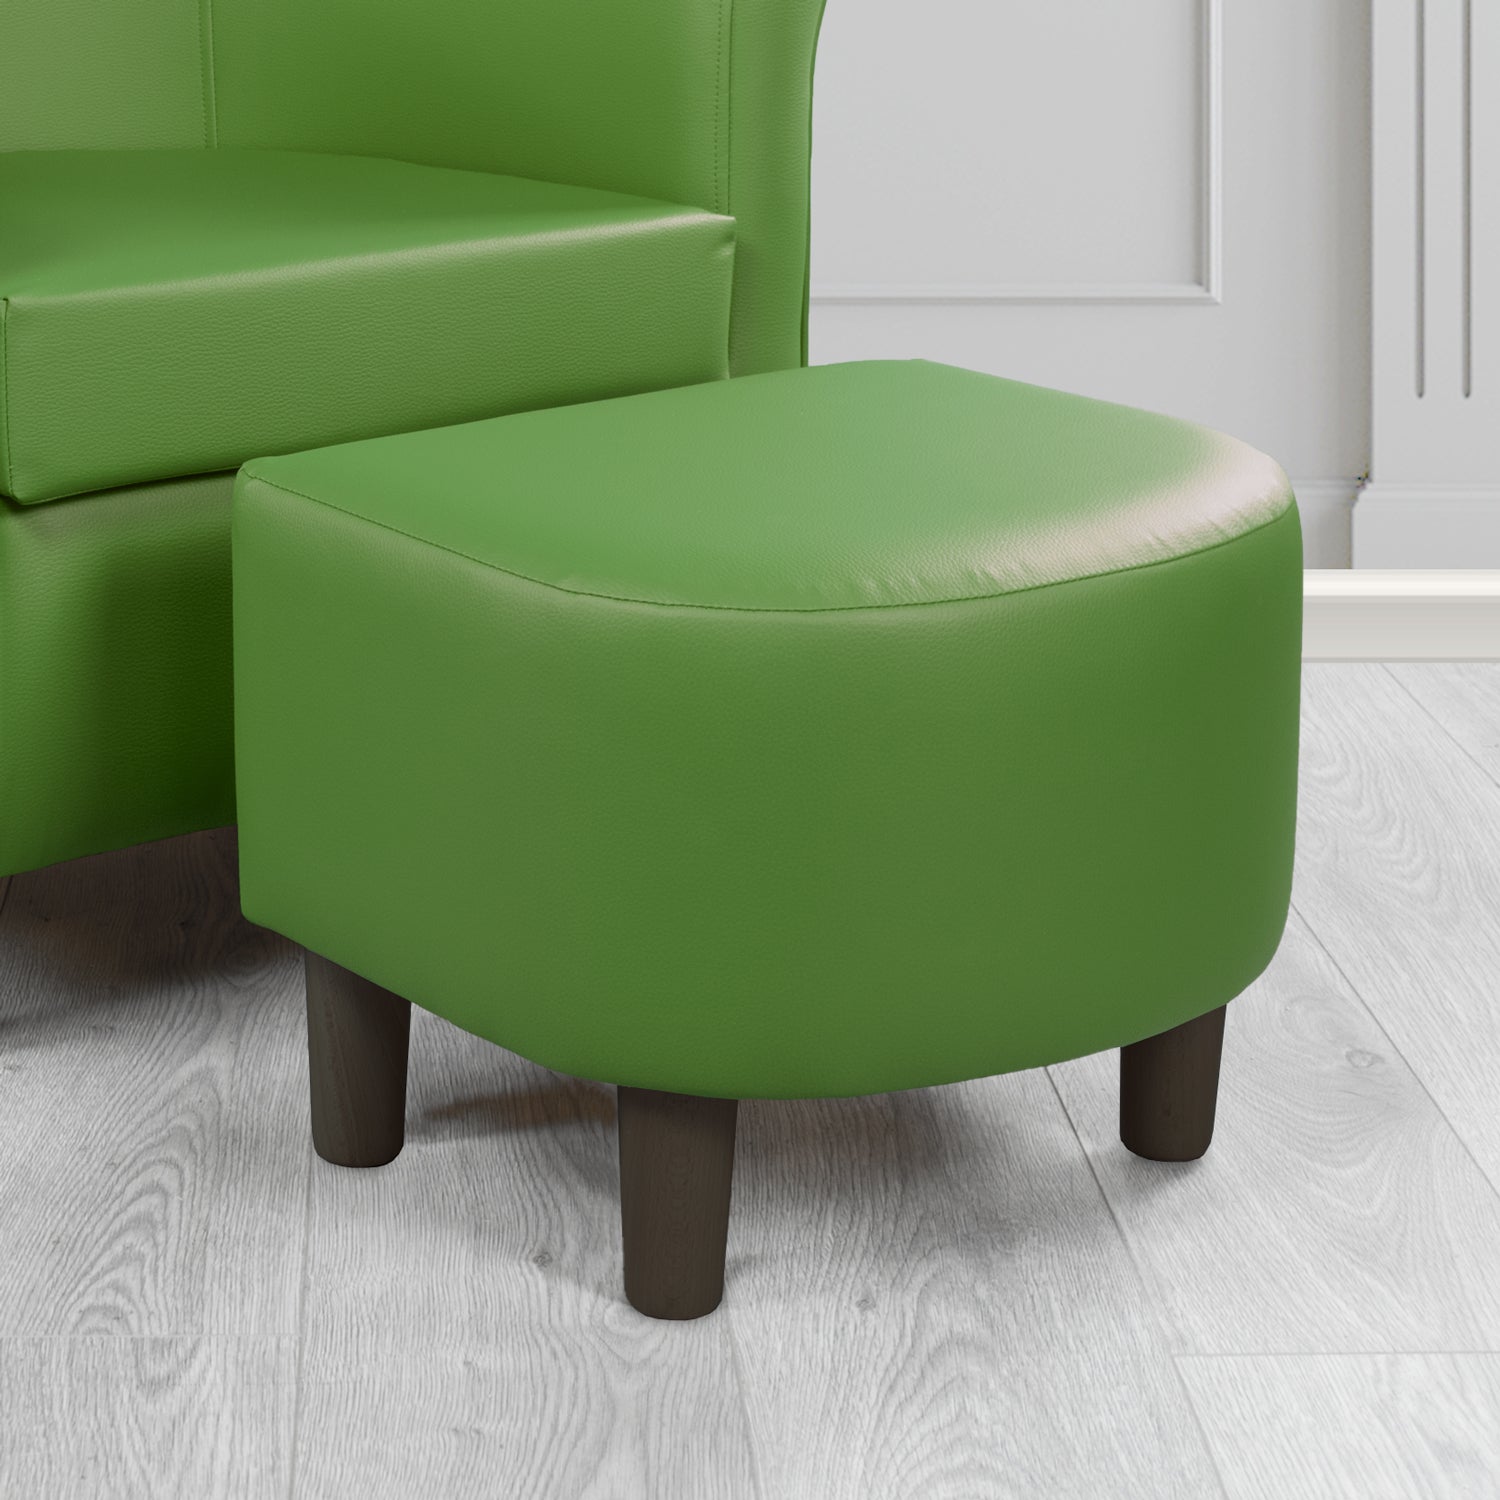 Tuscany Green Faux Leather Footstool (6541234044970)